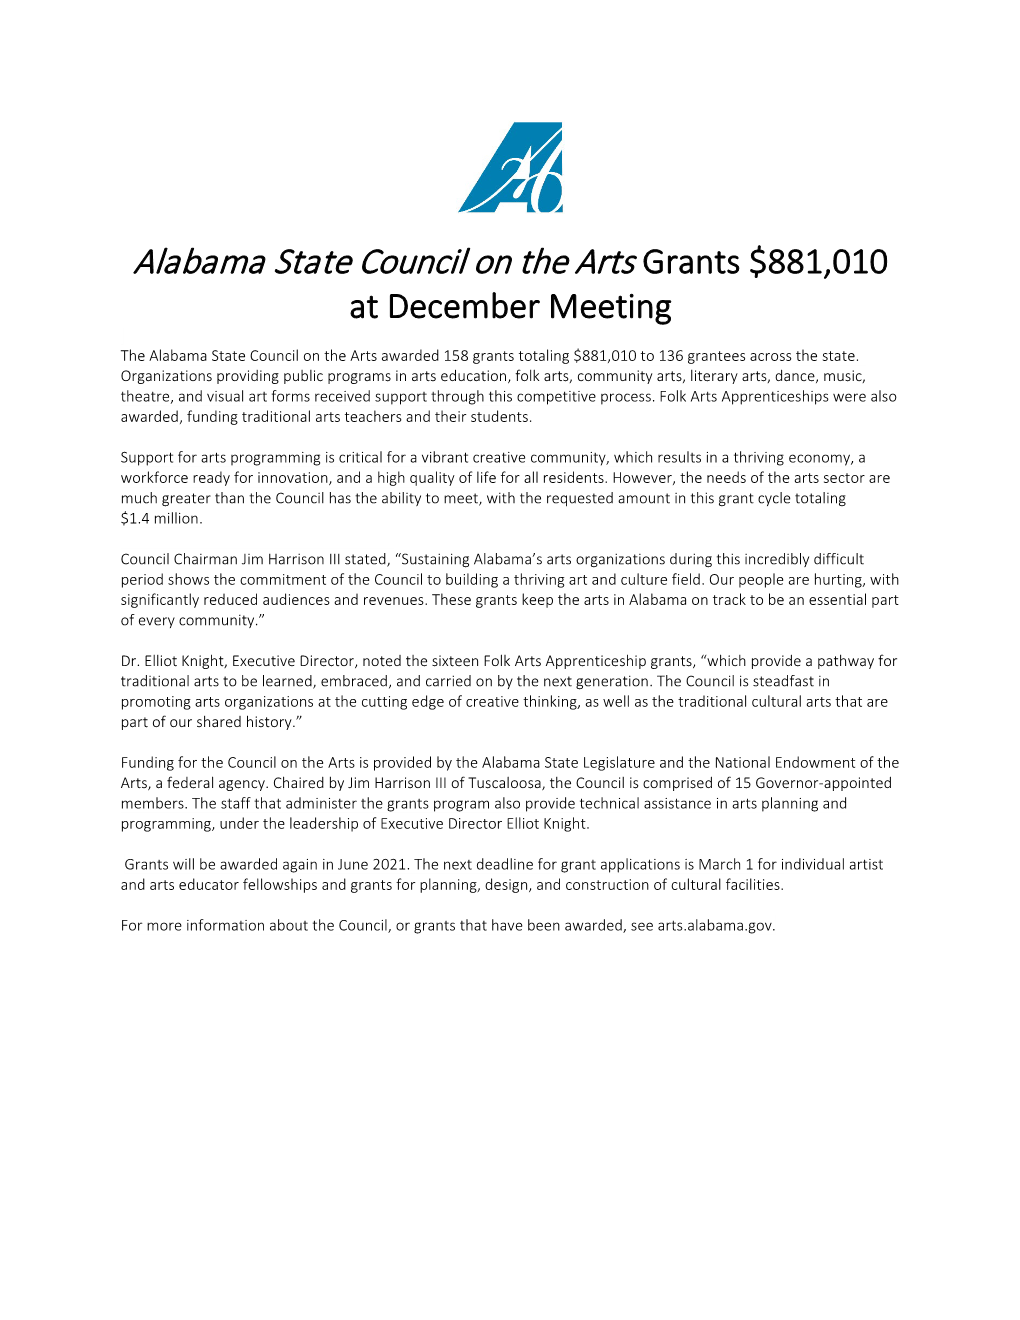 Alabama State Council on the Arts Grants $881,010 at December Meeting